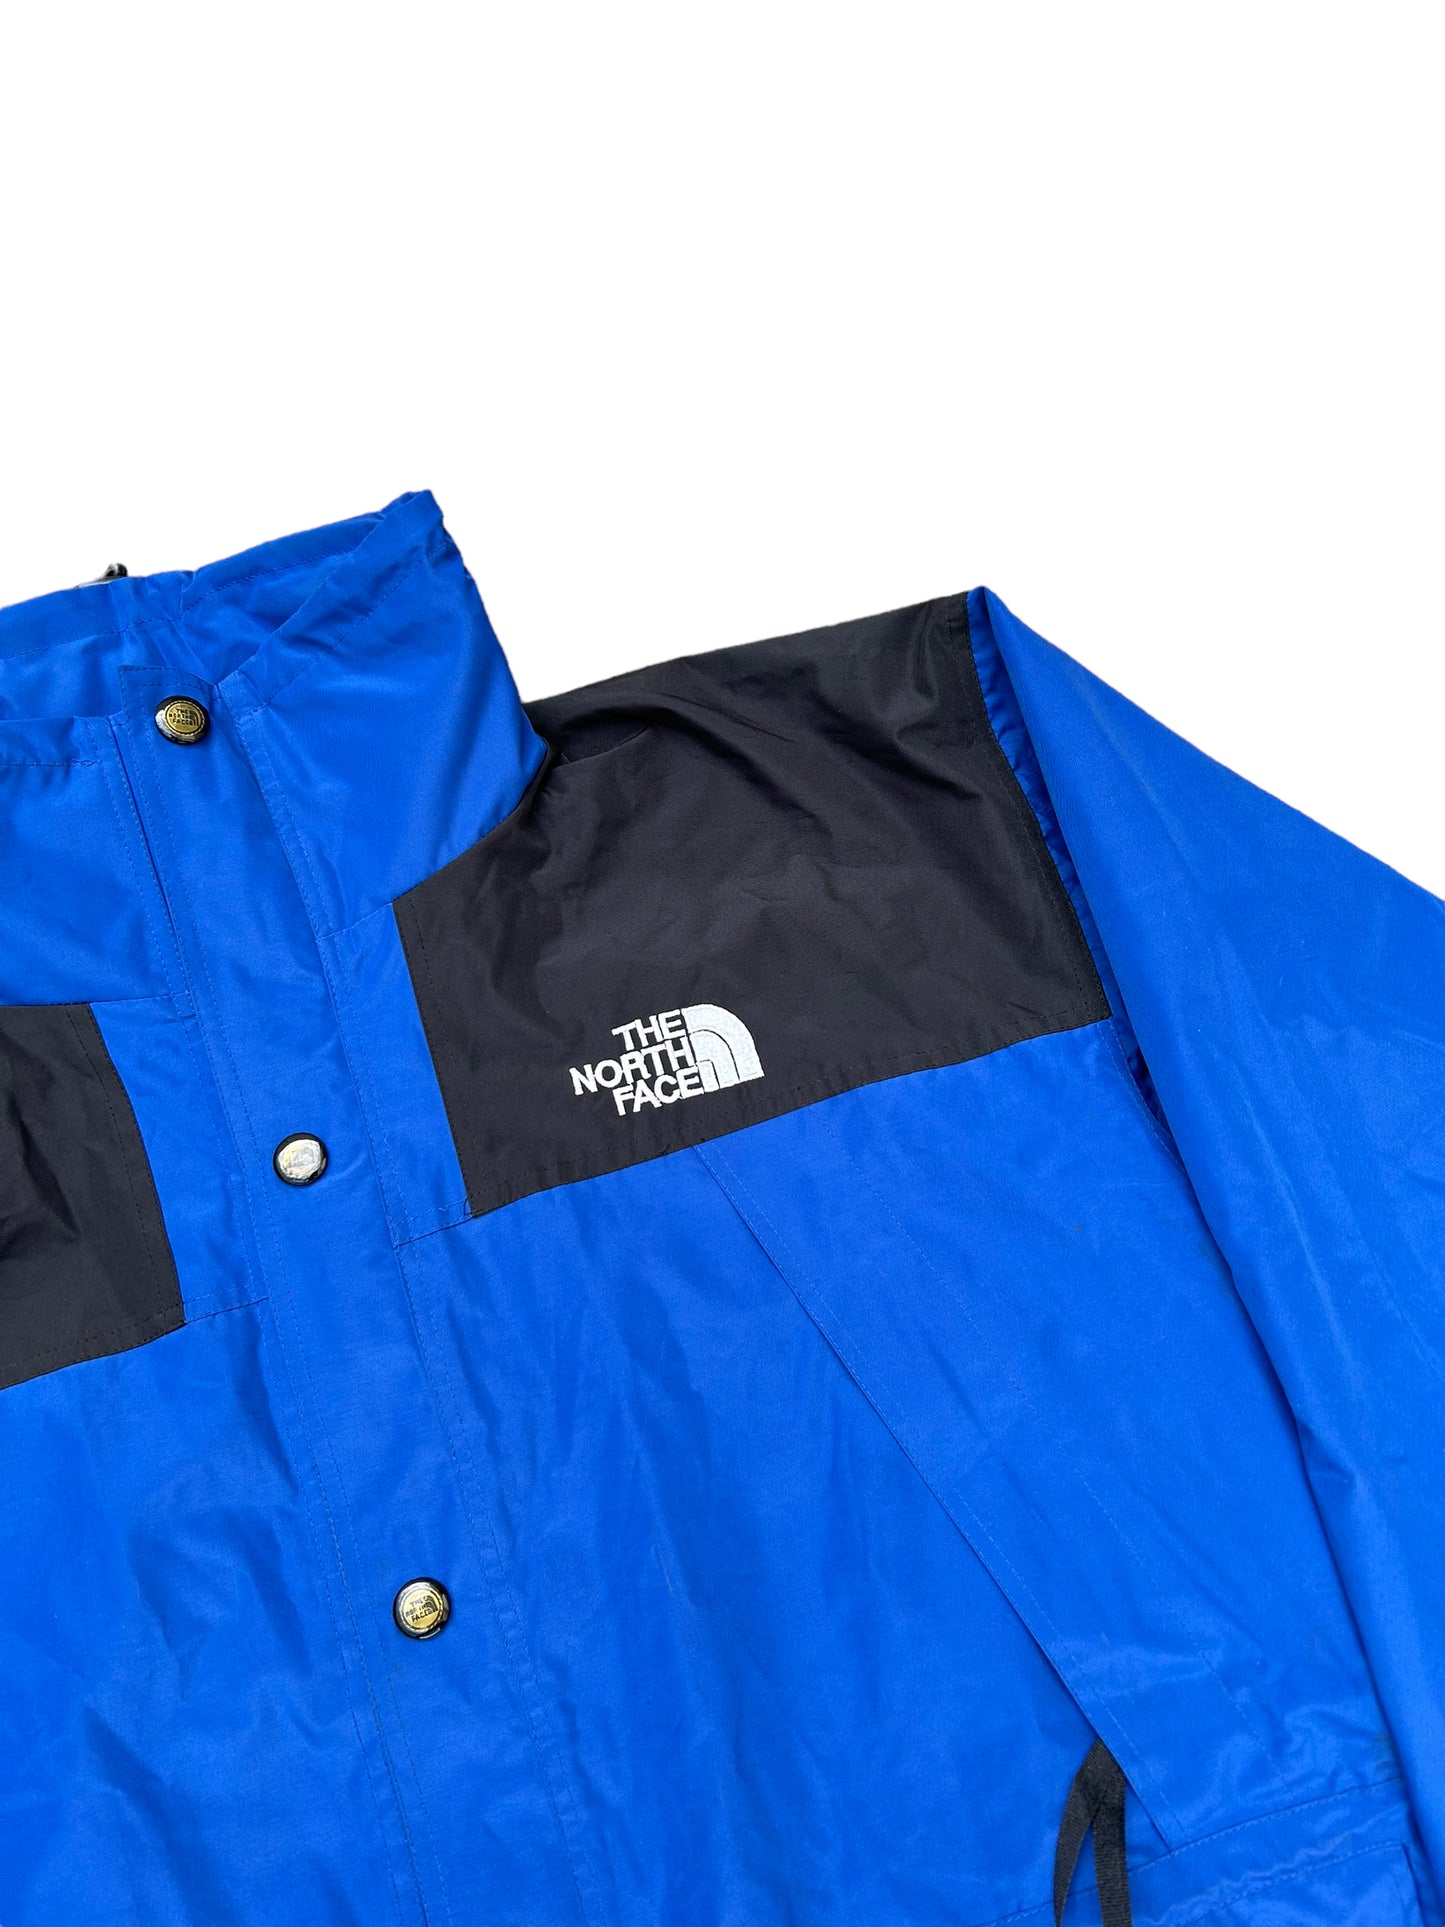 The North Face Gore-Tex Jacket